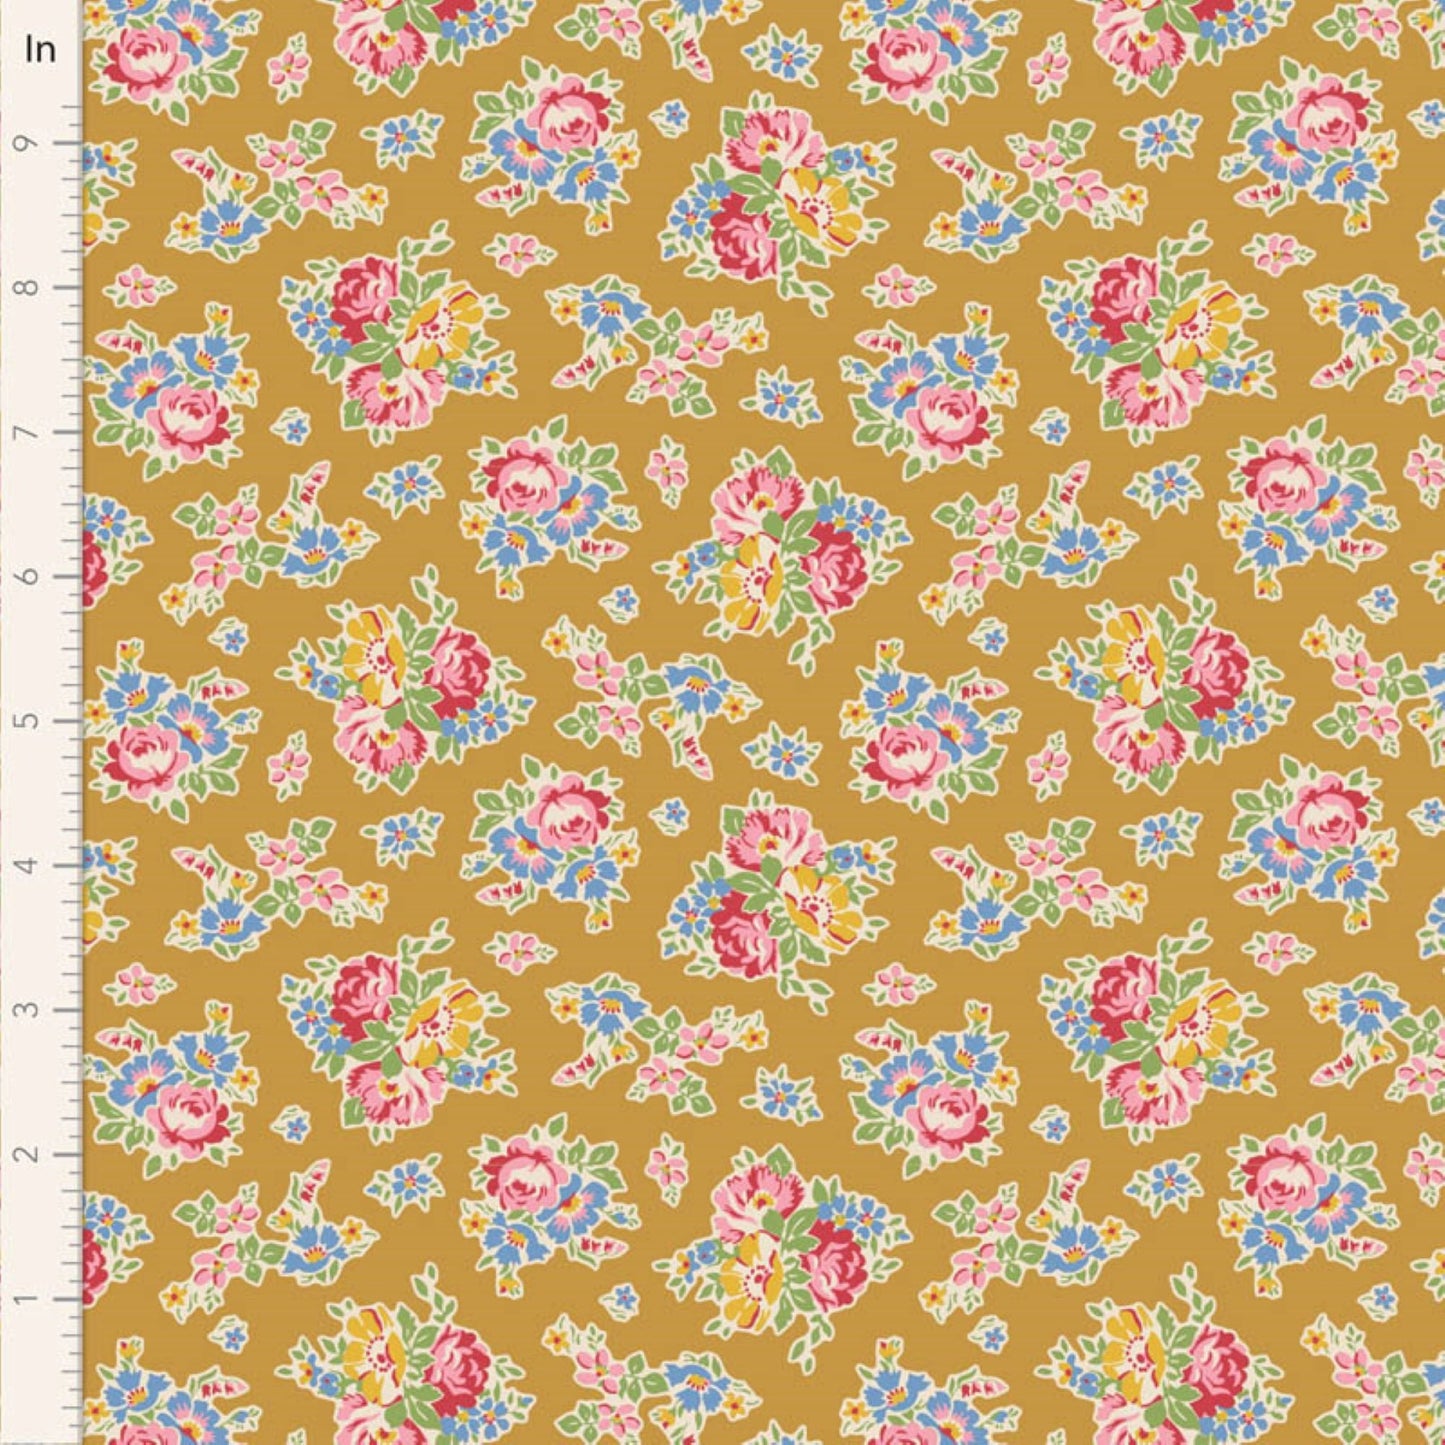 Tilda Jubilee and Farm Flowers floral mustard yellow and pink bundle 7 Fat Eighths cotton quilt fabric